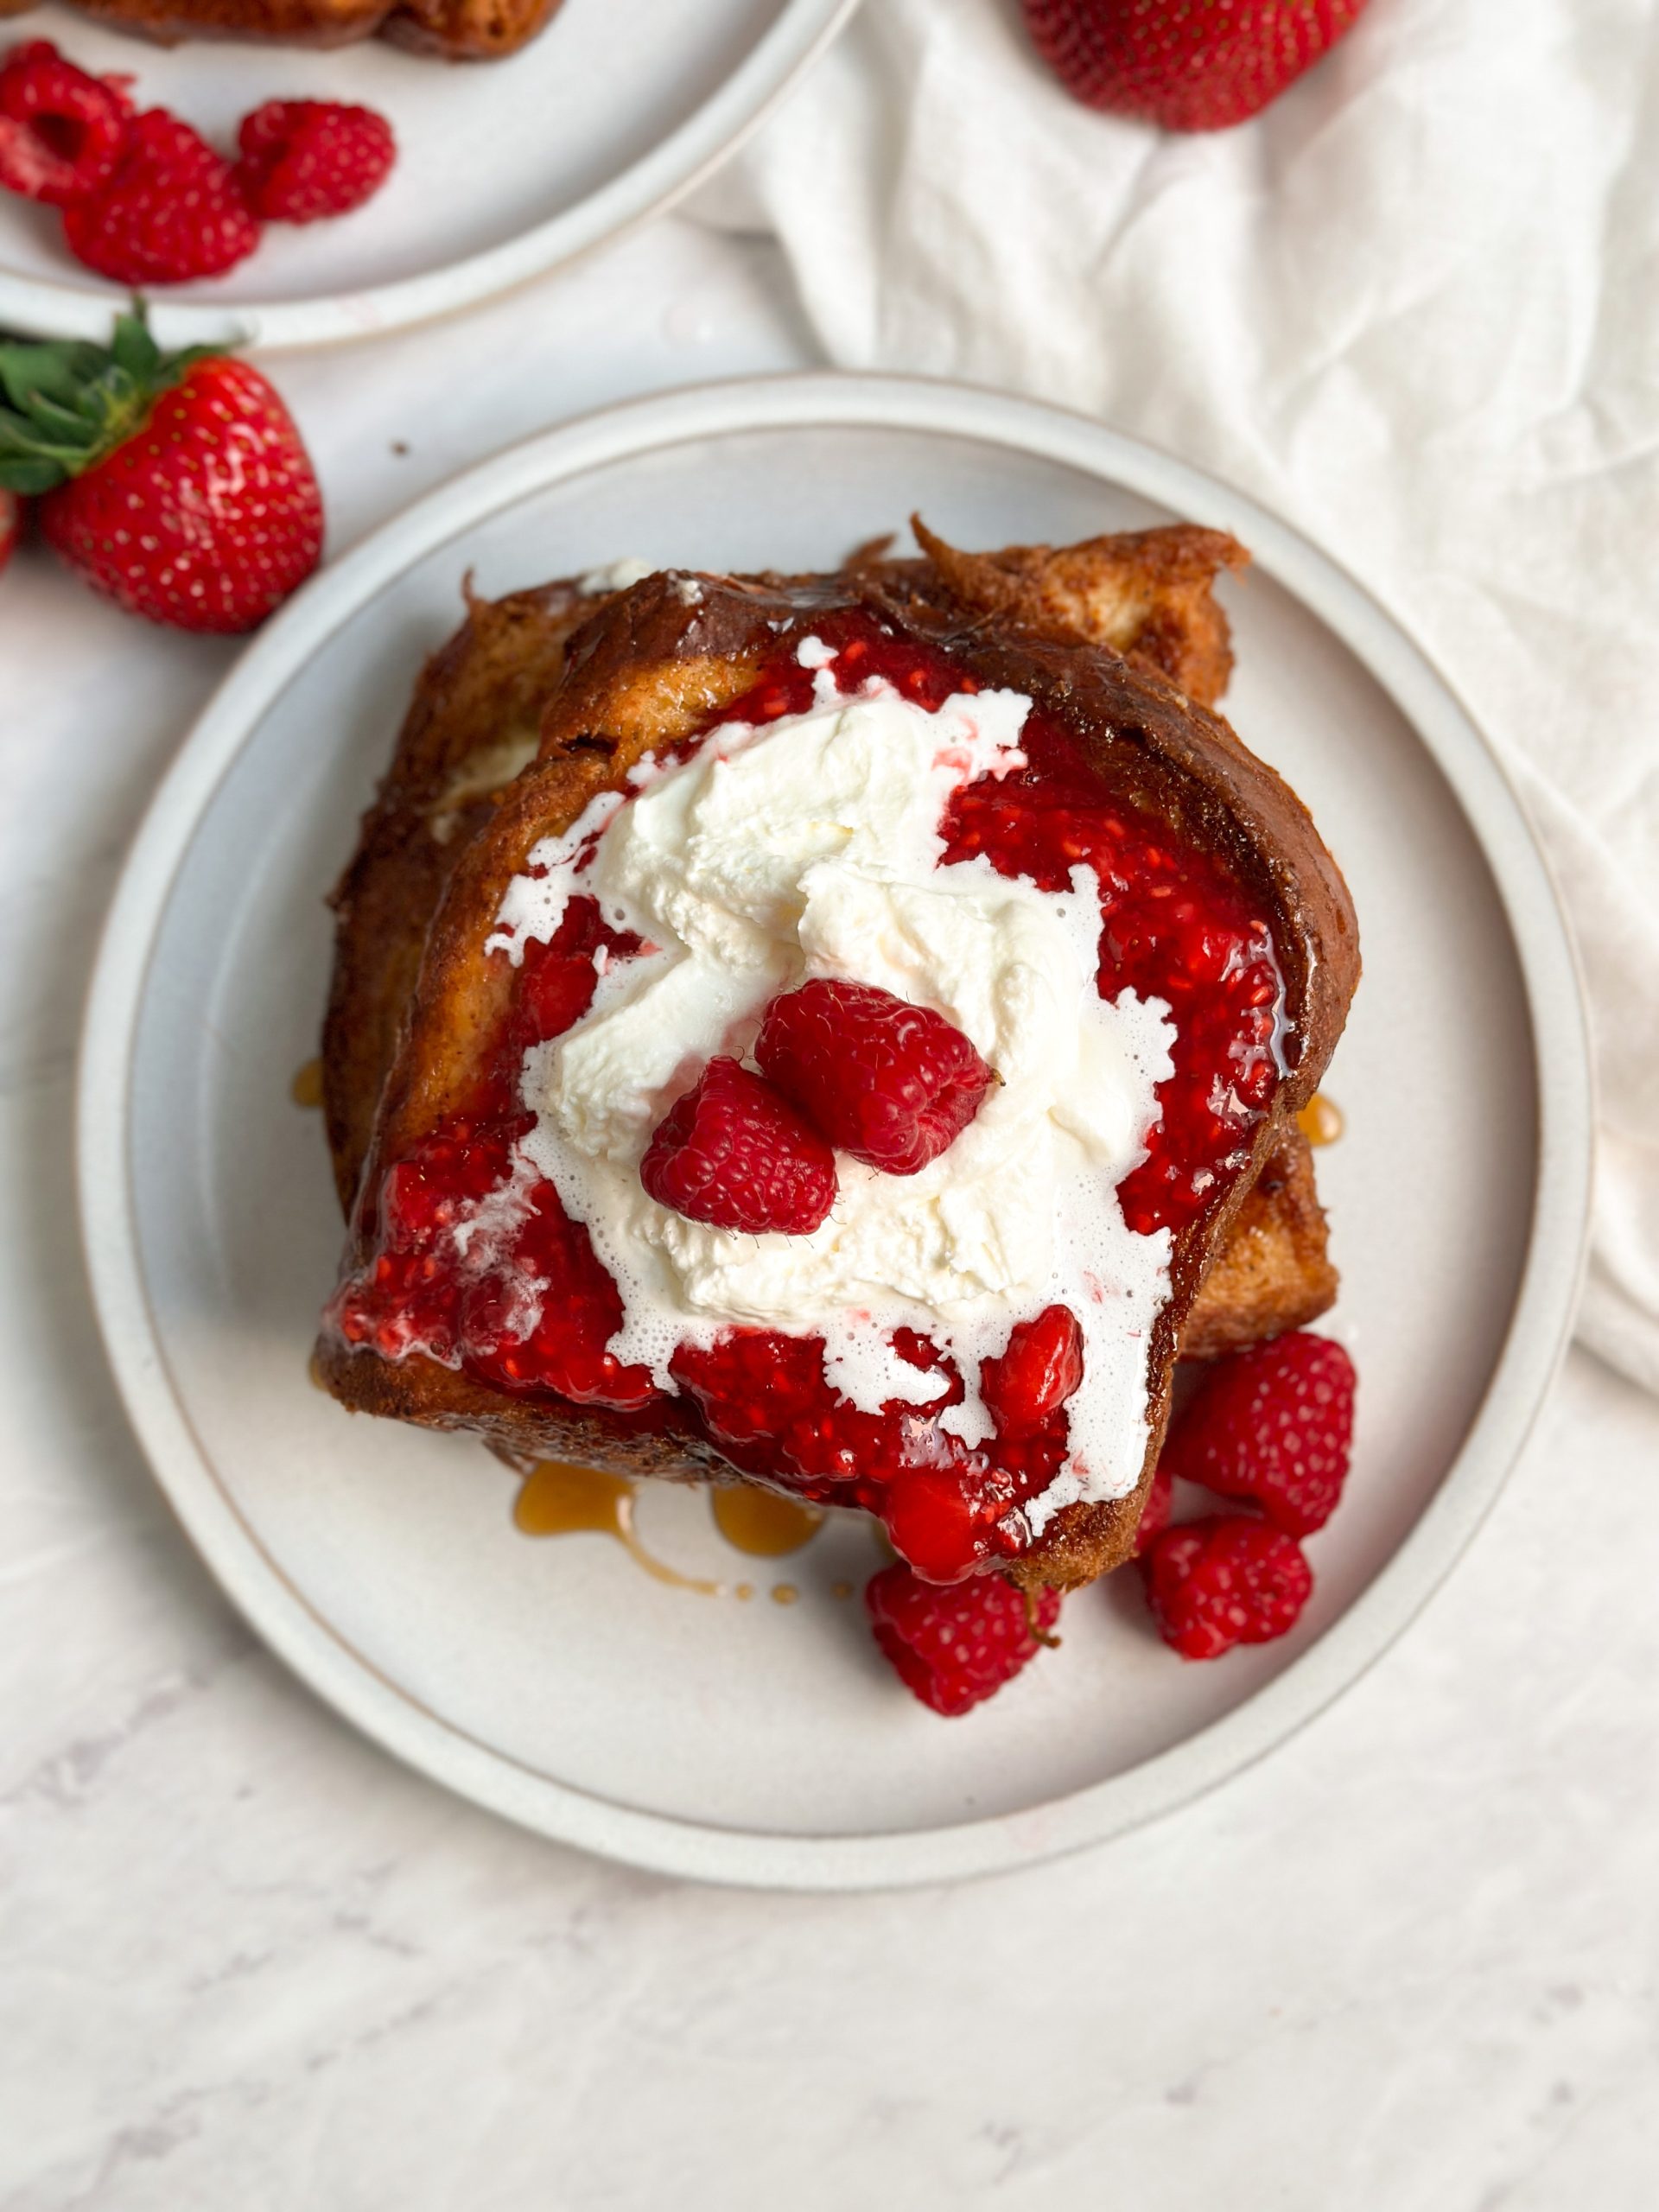 2 slices of cheesecake french toast on a plate with a berry compote, whipped cream and fresh raspberries from the top